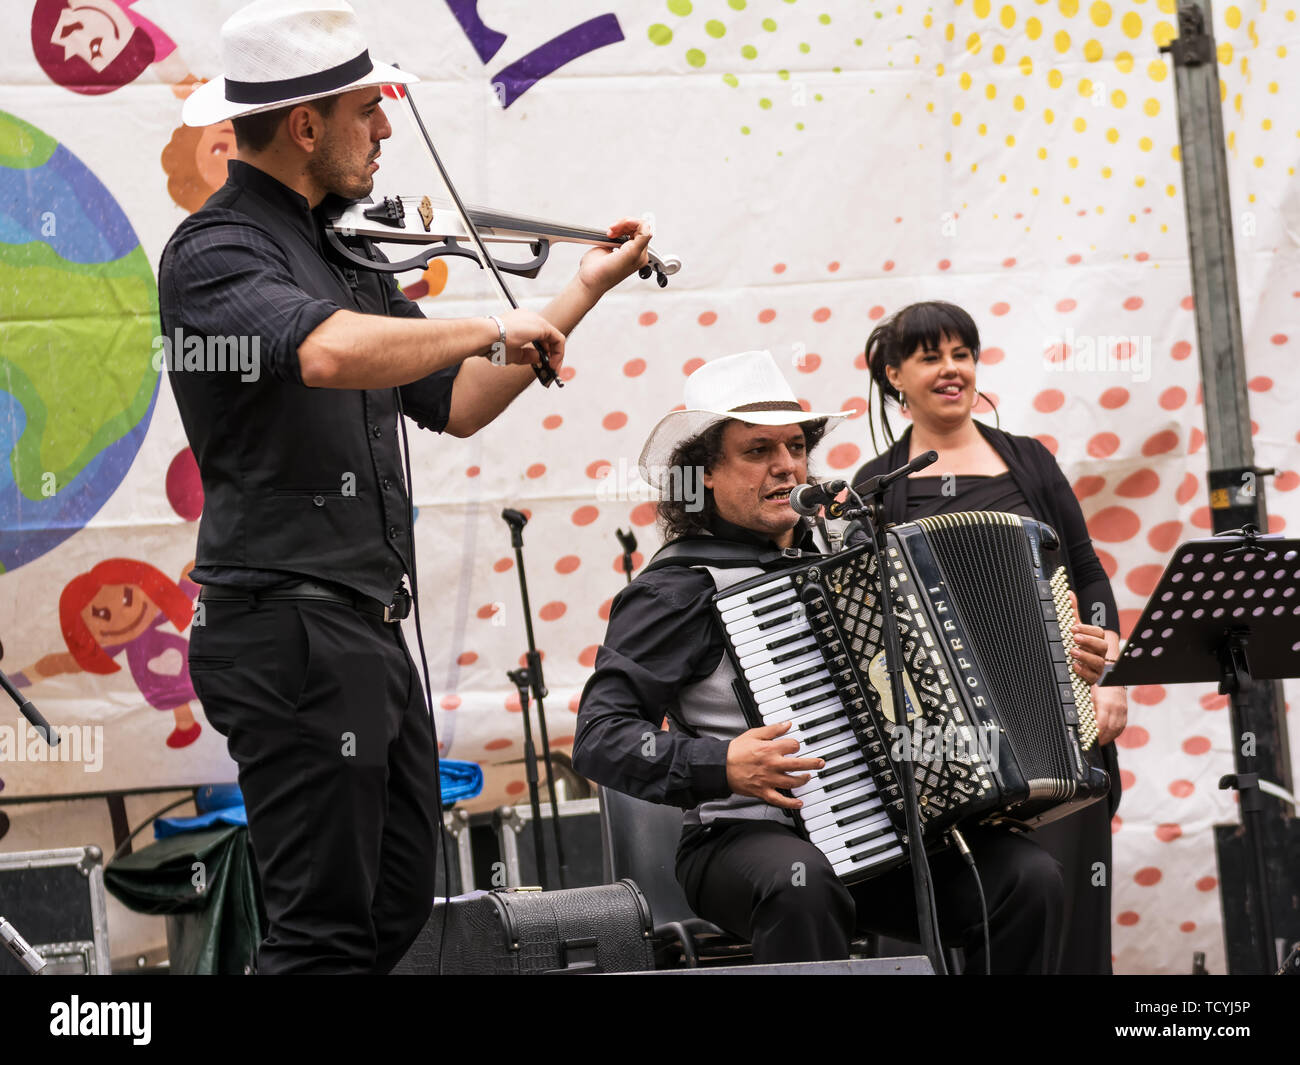 Chieti, Italy - May 18, 2019: The band of the singer ROM Santino Spinelli performs at the Festa dei Popoli in Chieti Stock Photo